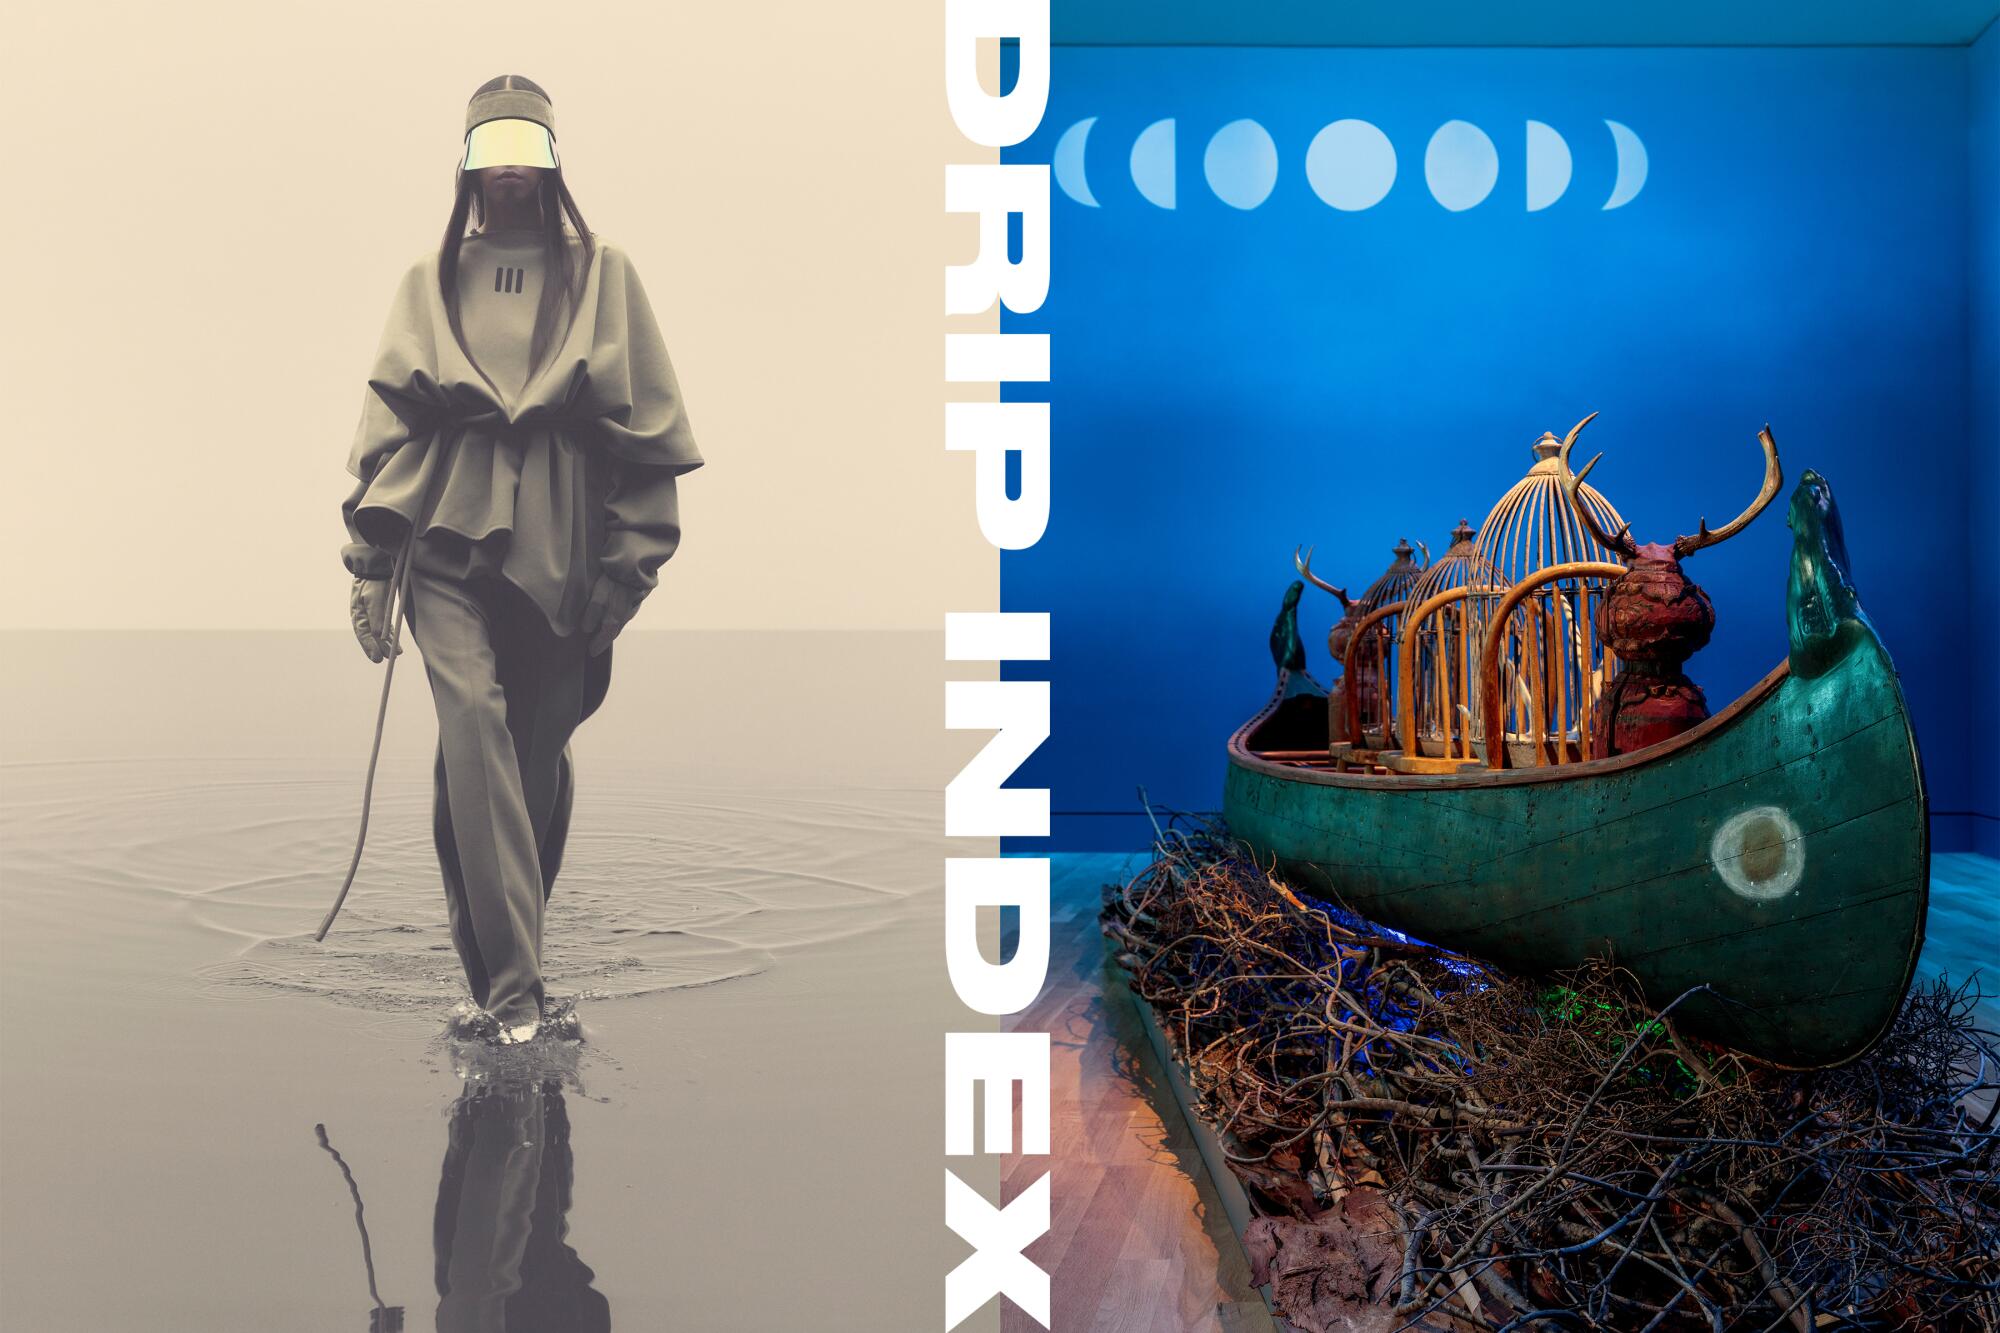 two fashion and art photos side-by-side with the words “Drip Index” running vertical between them